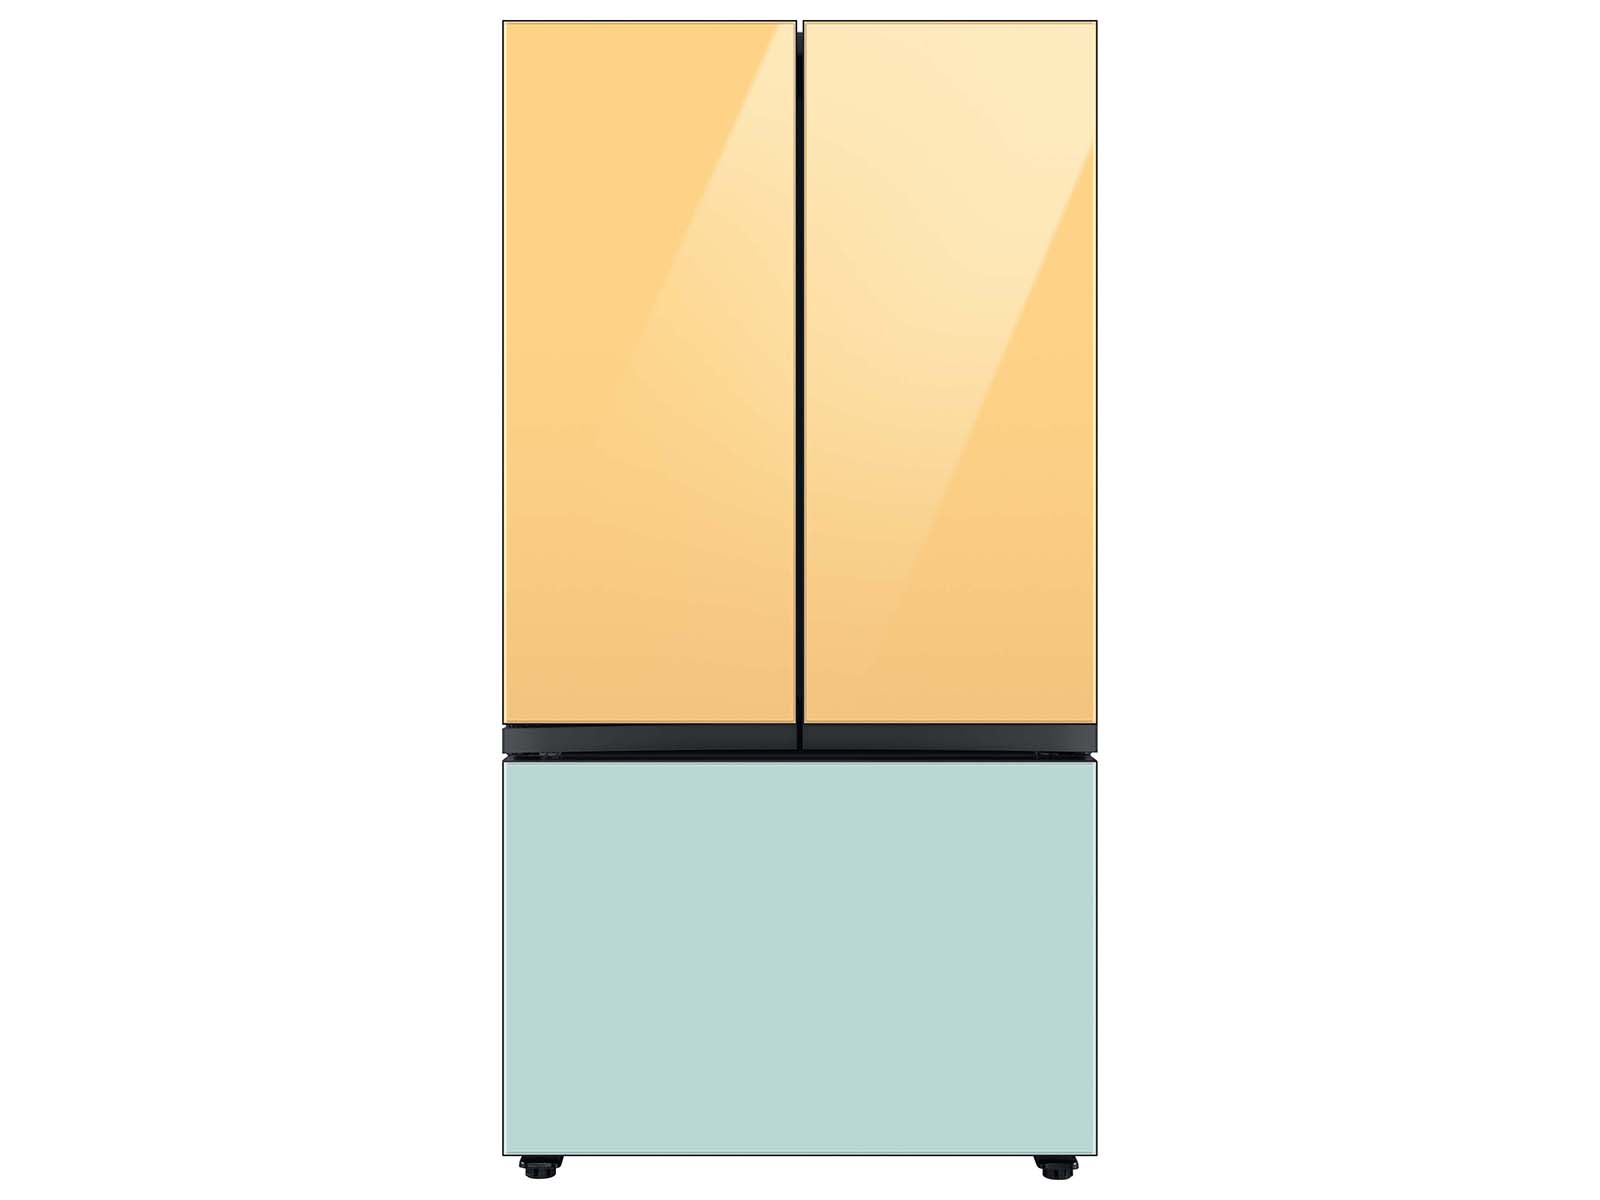 Bespoke-3-Door-French-Door-Refrigerator-Panel-in-Morning-Blue-Glass-Bottom-Panel  Home Appliances Accessories - RA-F36DB3CM/AA